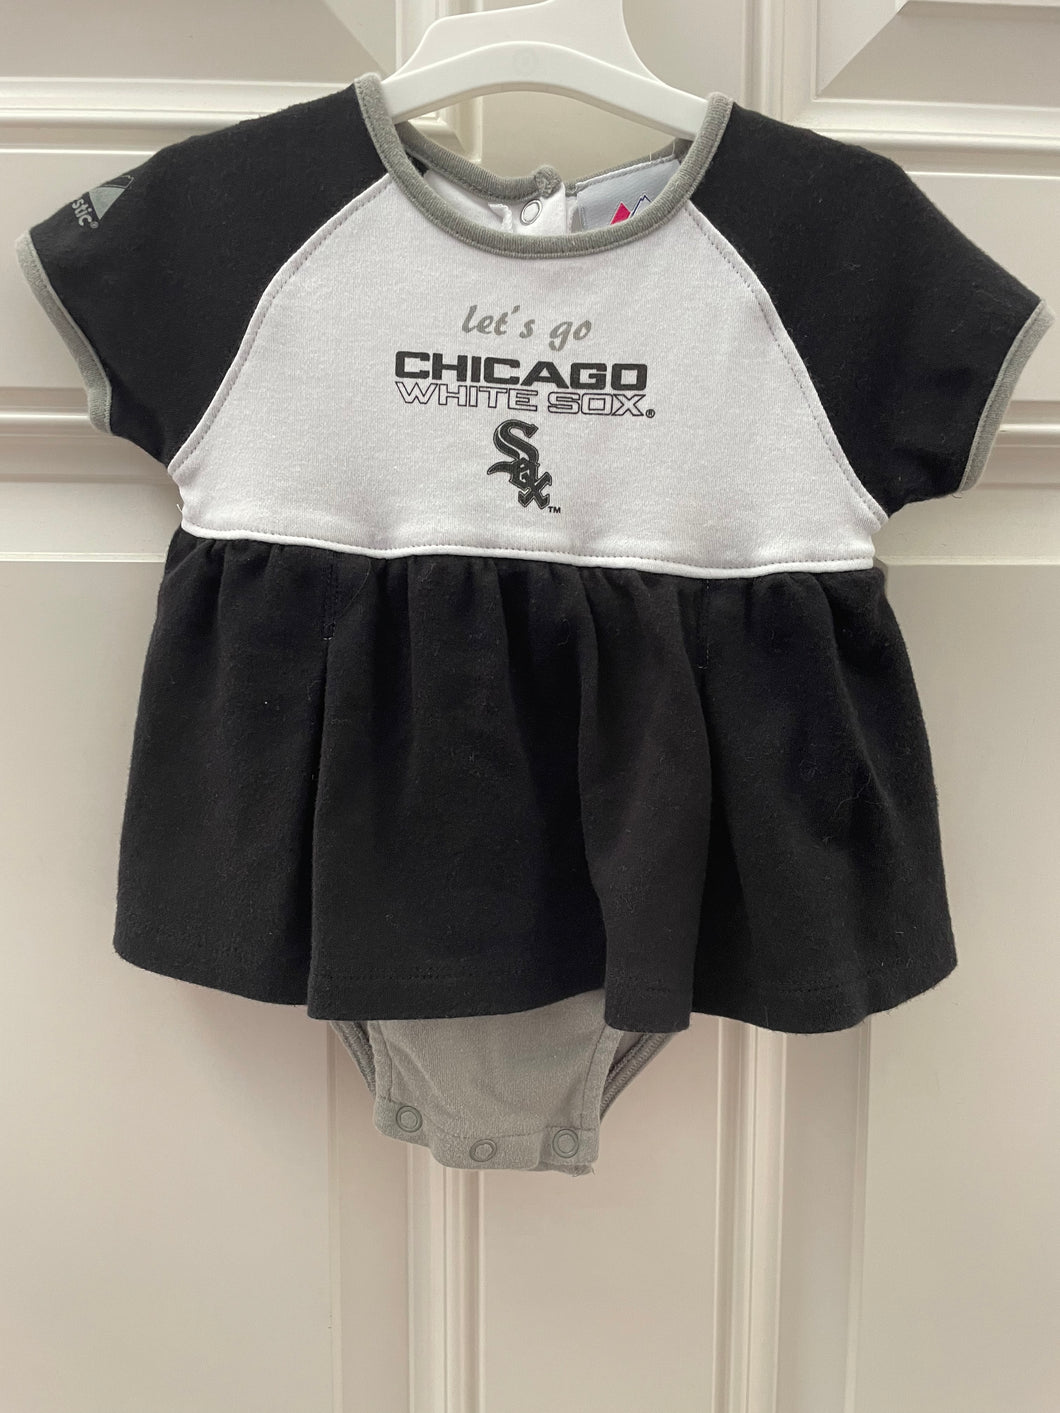 Majestic Chicago White Sox onsie dress 6 months